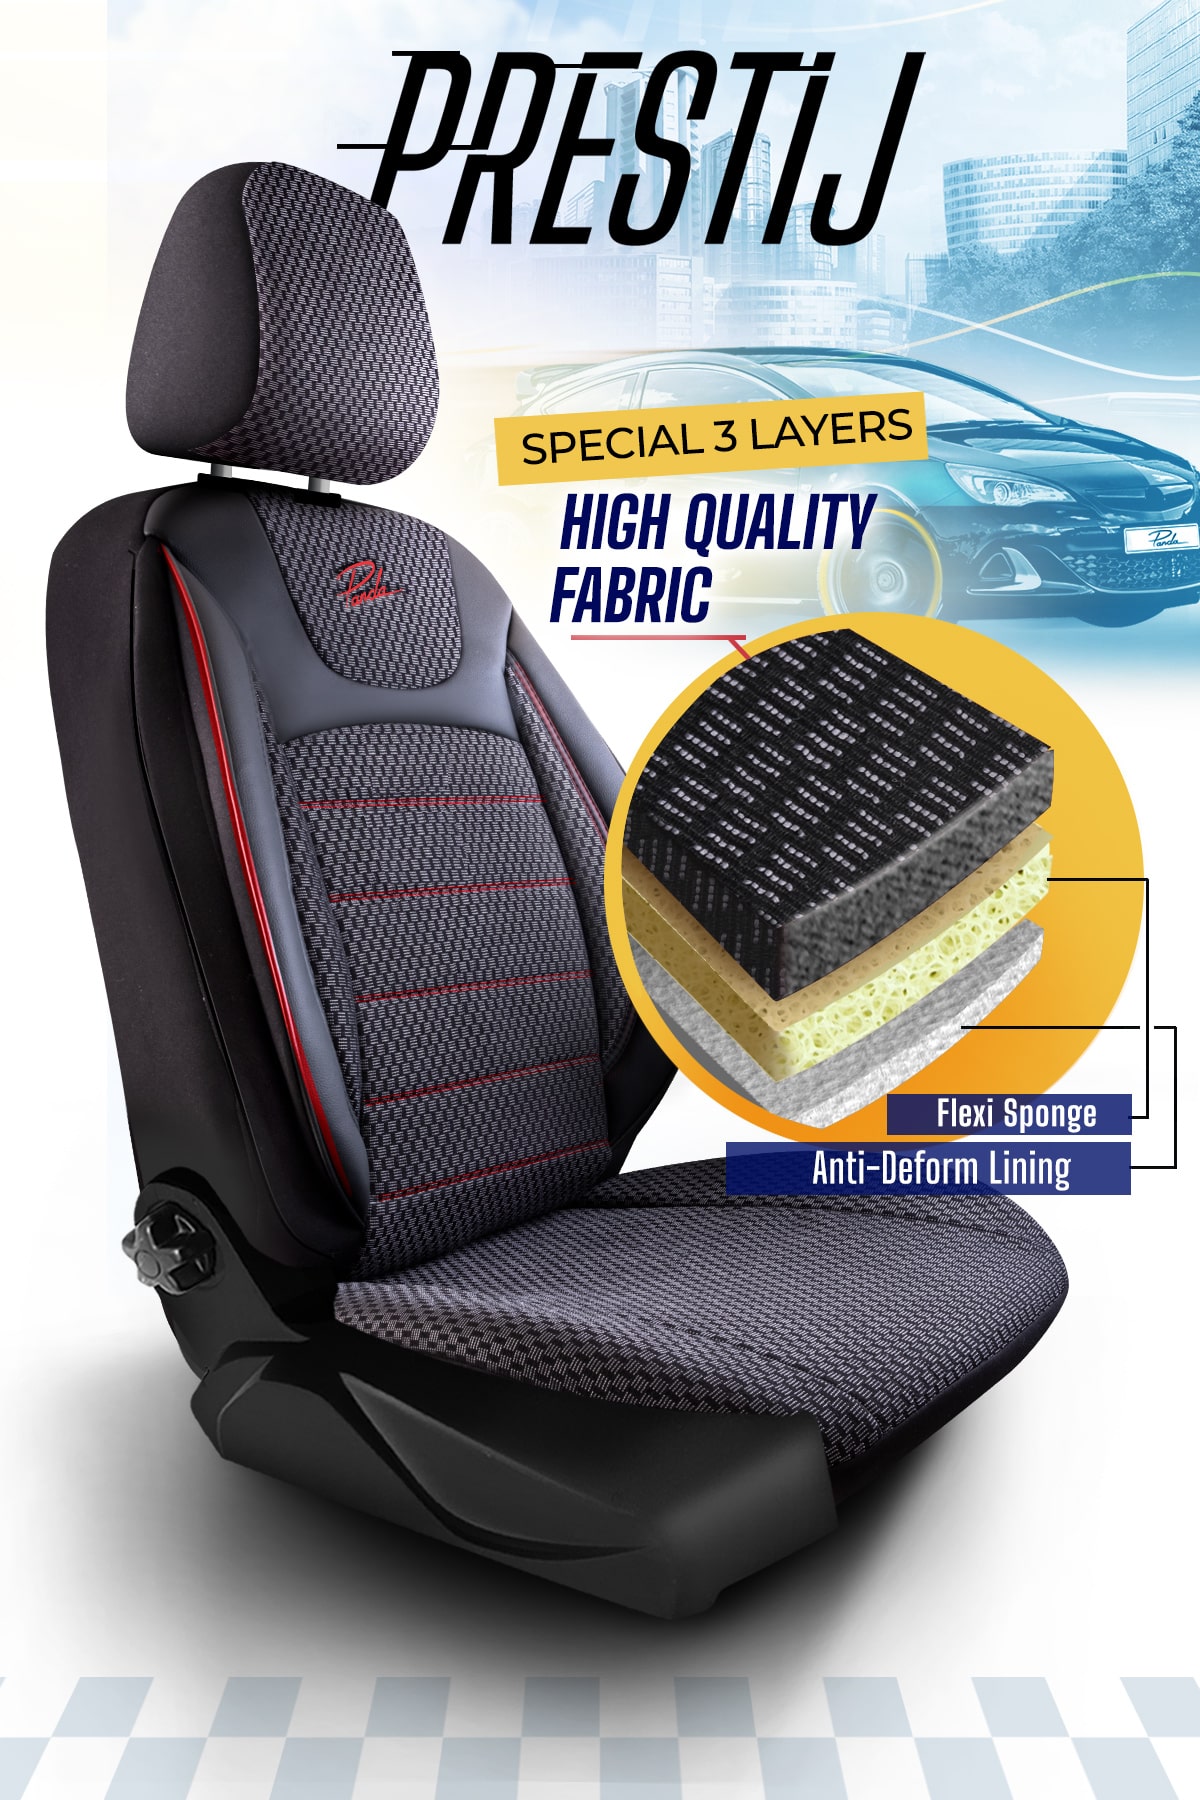 Coloranimal Red Rose Car Seat Covers Protector 2 Piece Dustproof Cover Front Seats Saddle Blanket Comfortable Interior Auto Accessories Universal Fit 